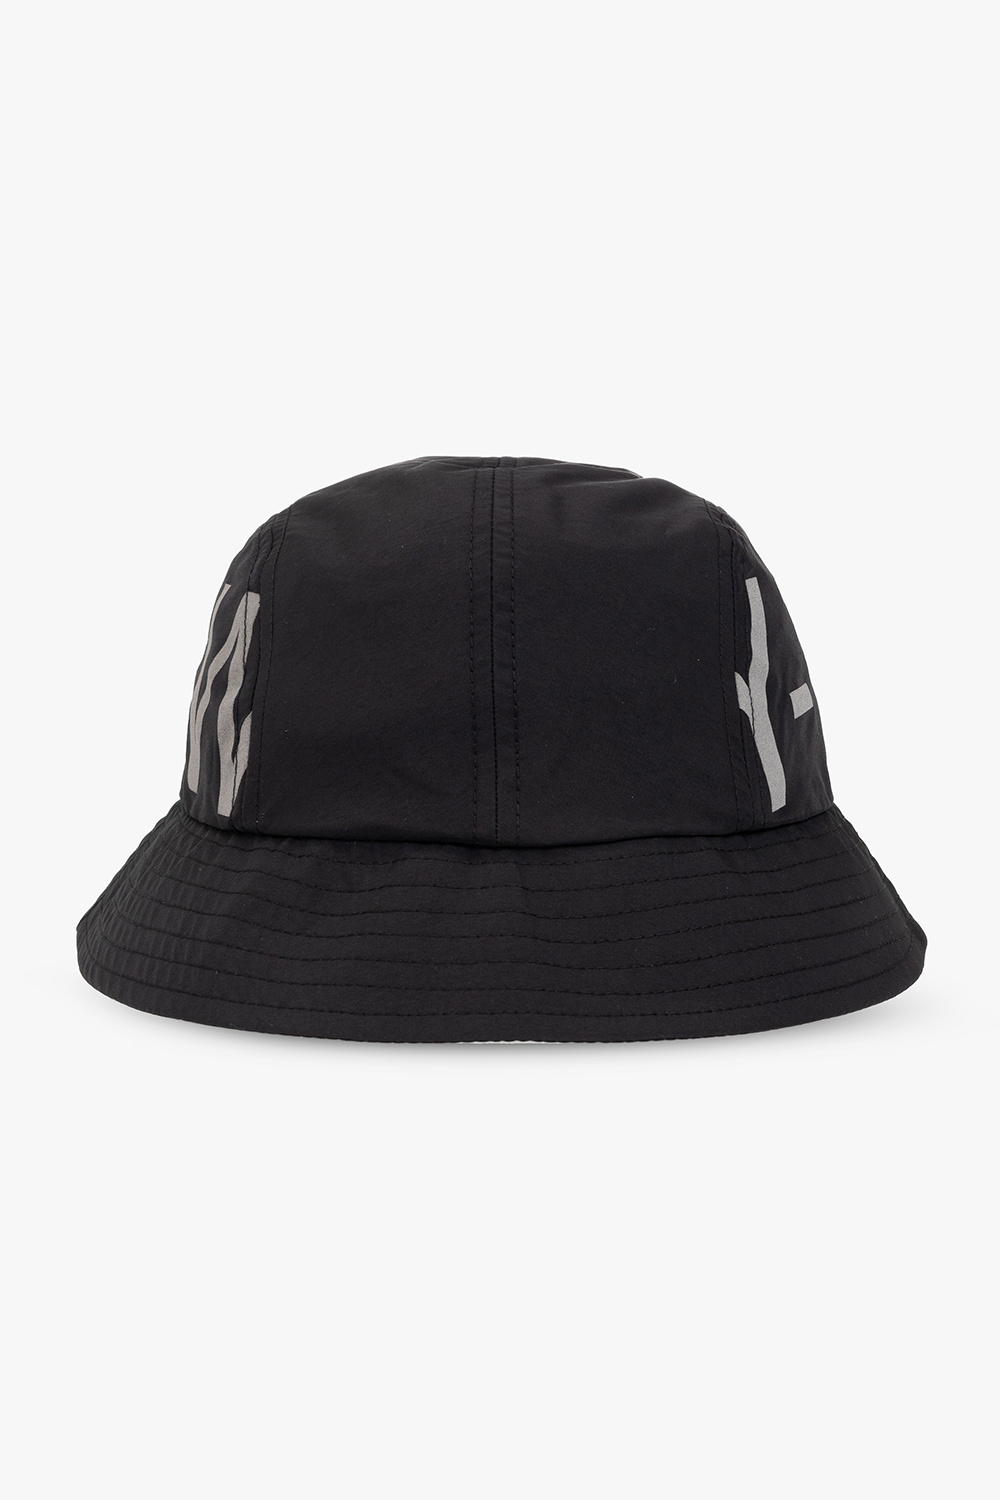 A-COLD-WALL* Bucket hat 200mg with logo